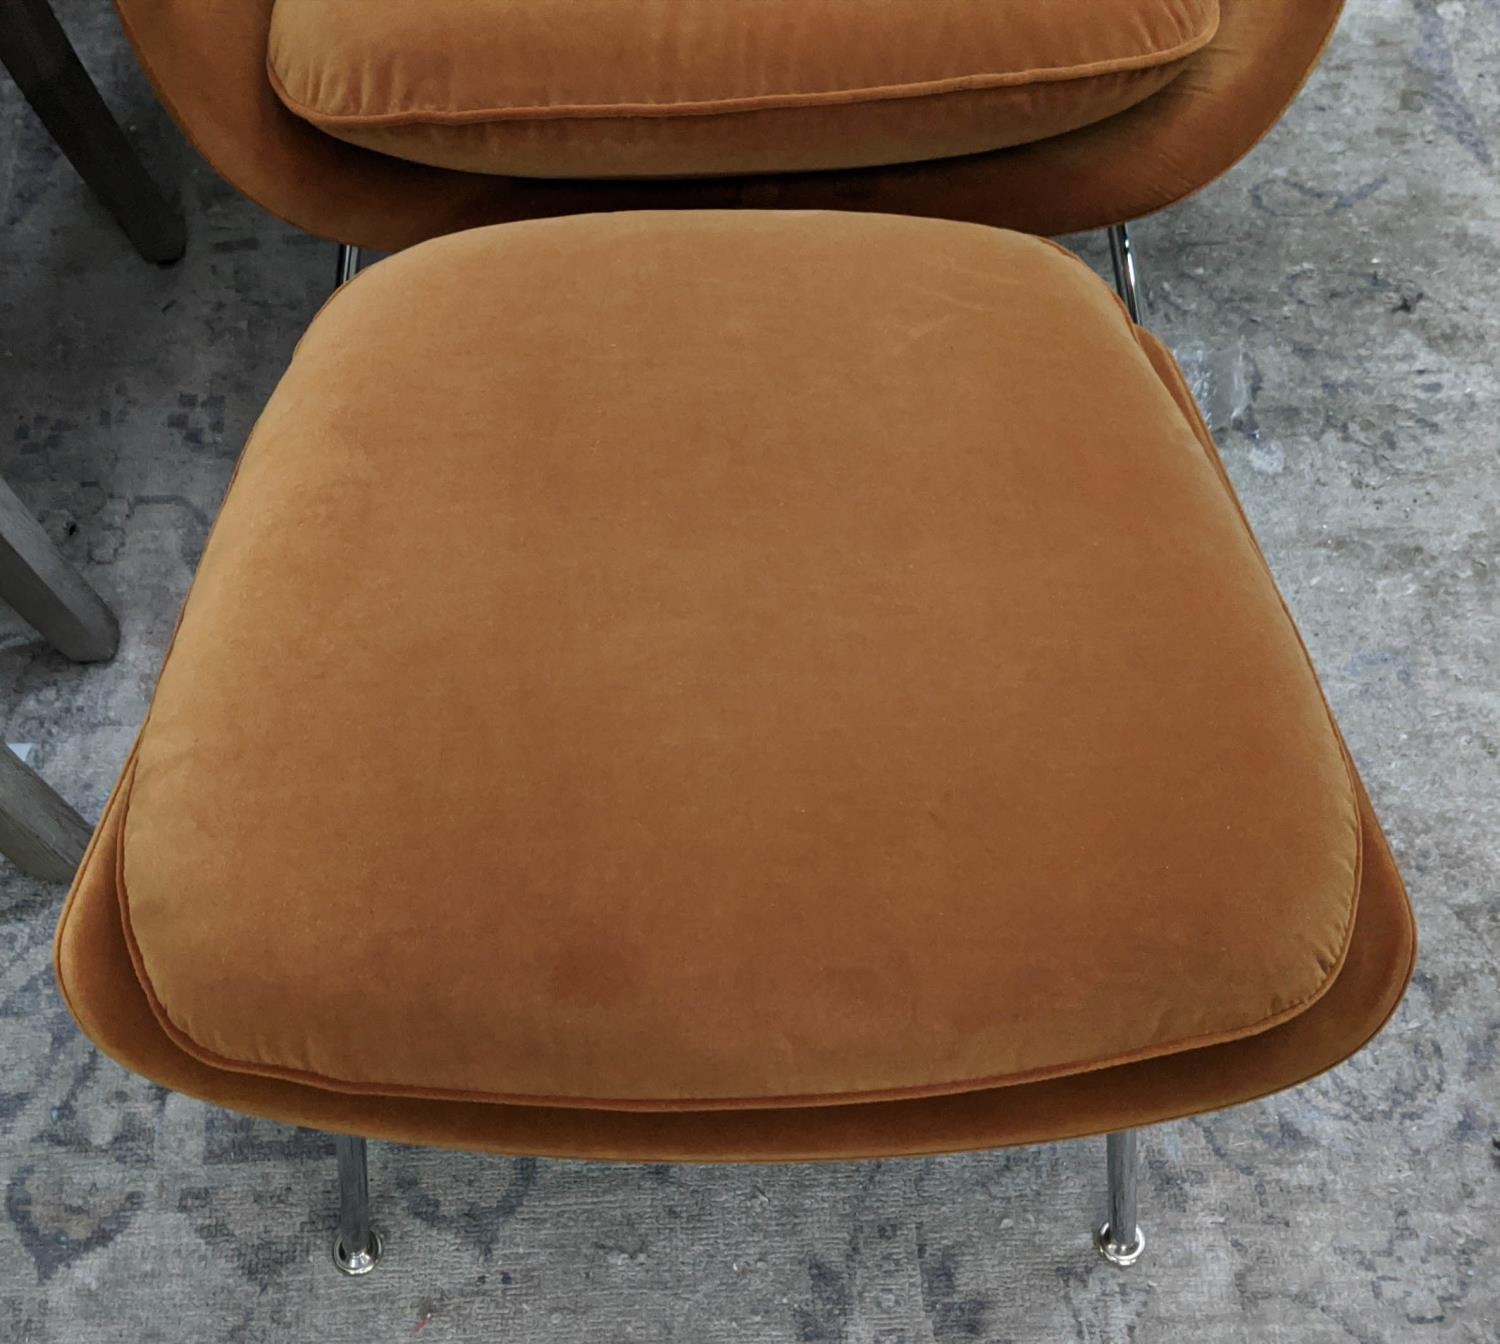 KNOLL WOMB CHAIR WITH OTTOMAN BY EERO SAARINEN, in Knoll Oh La La velvet, 95cm H. (2) - Image 3 of 4